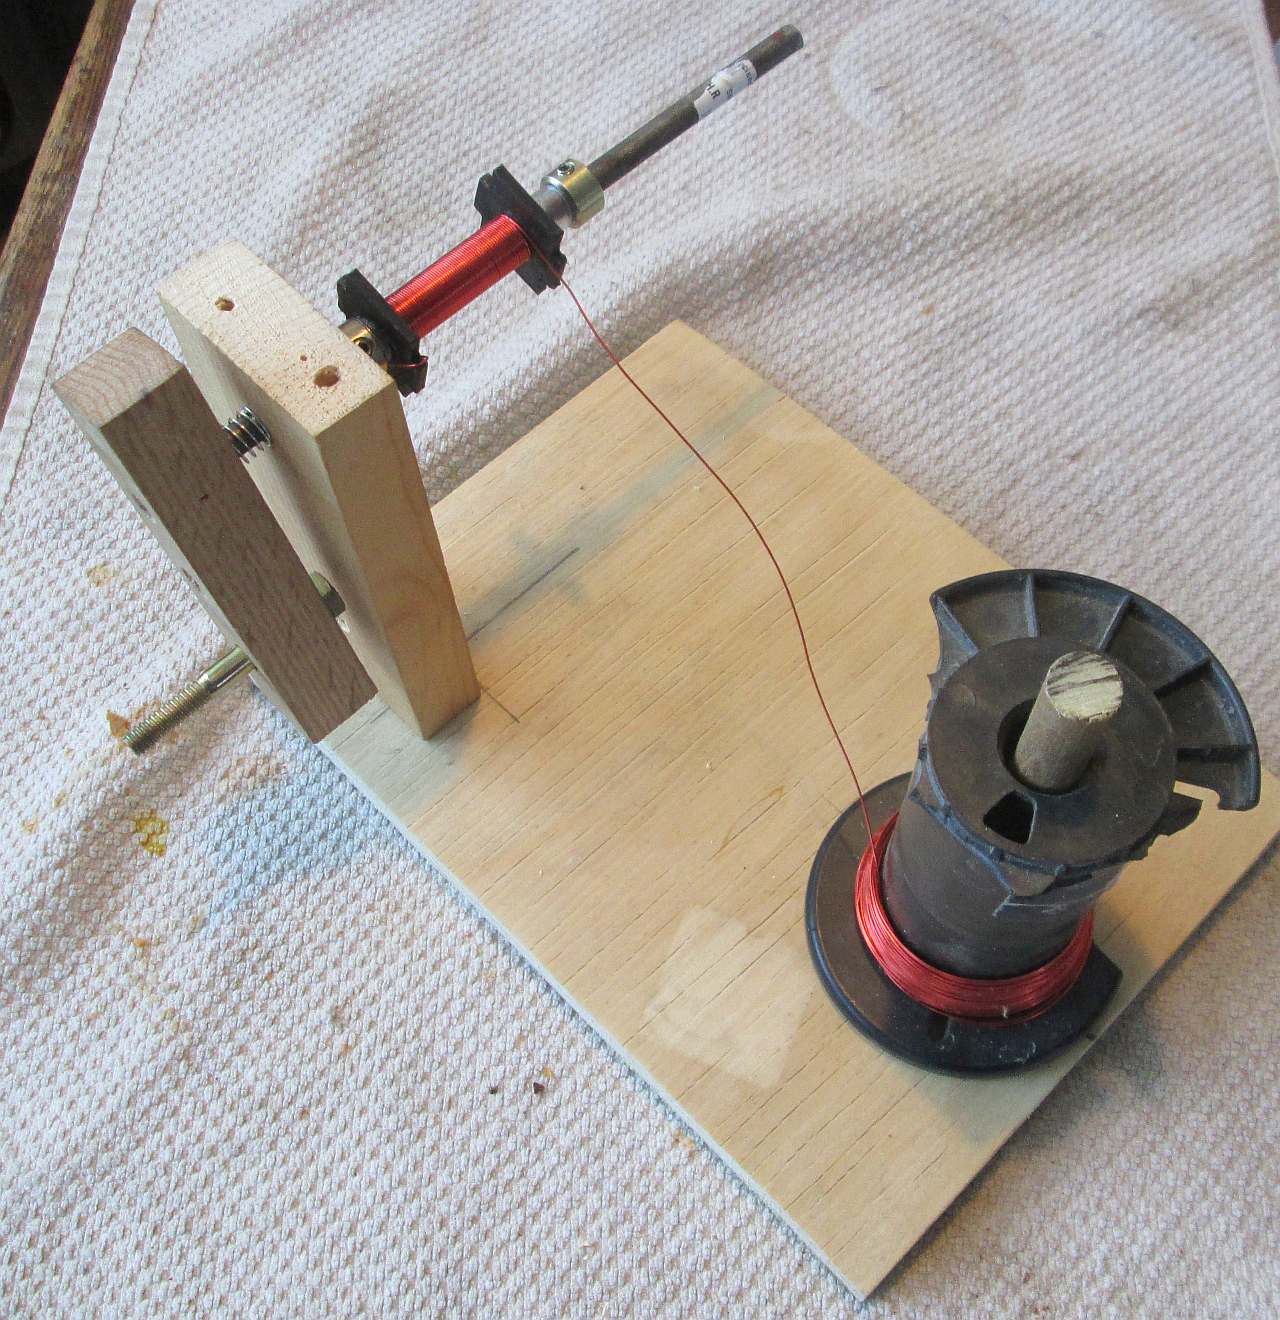 Quick Project: Building a DIY Coil Winding Jig From Scraps